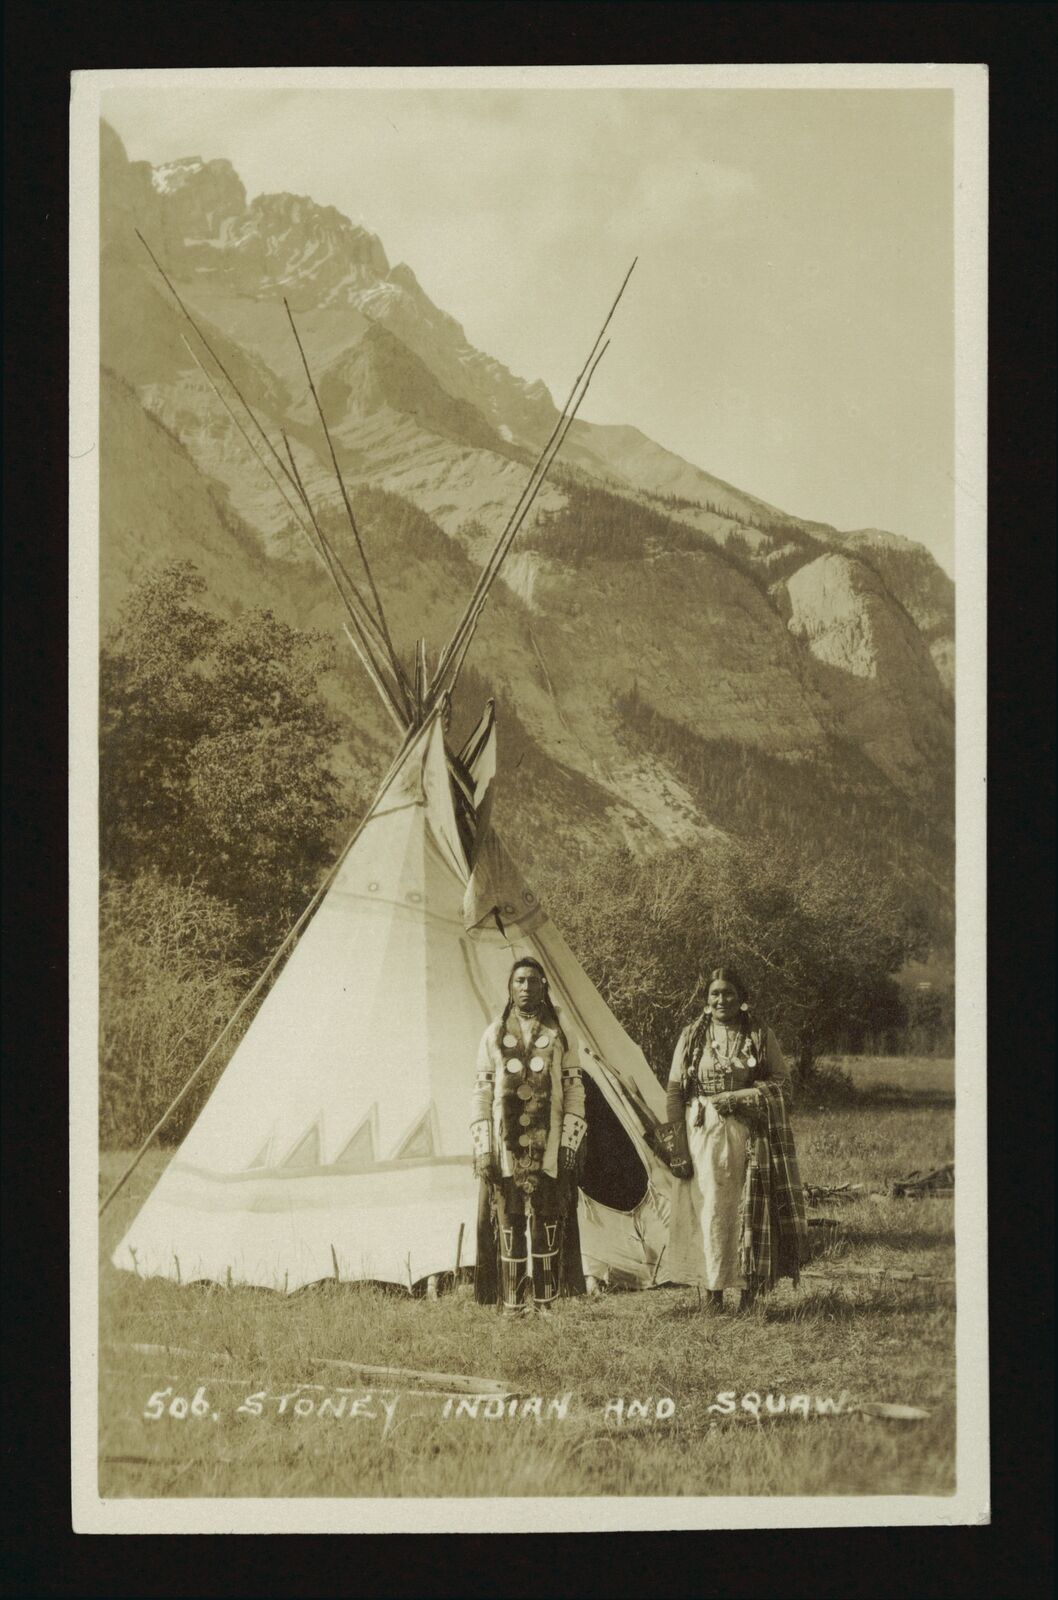 Stoney Indian and squaw - An image of an Aboriginal woman and man - Old Photo